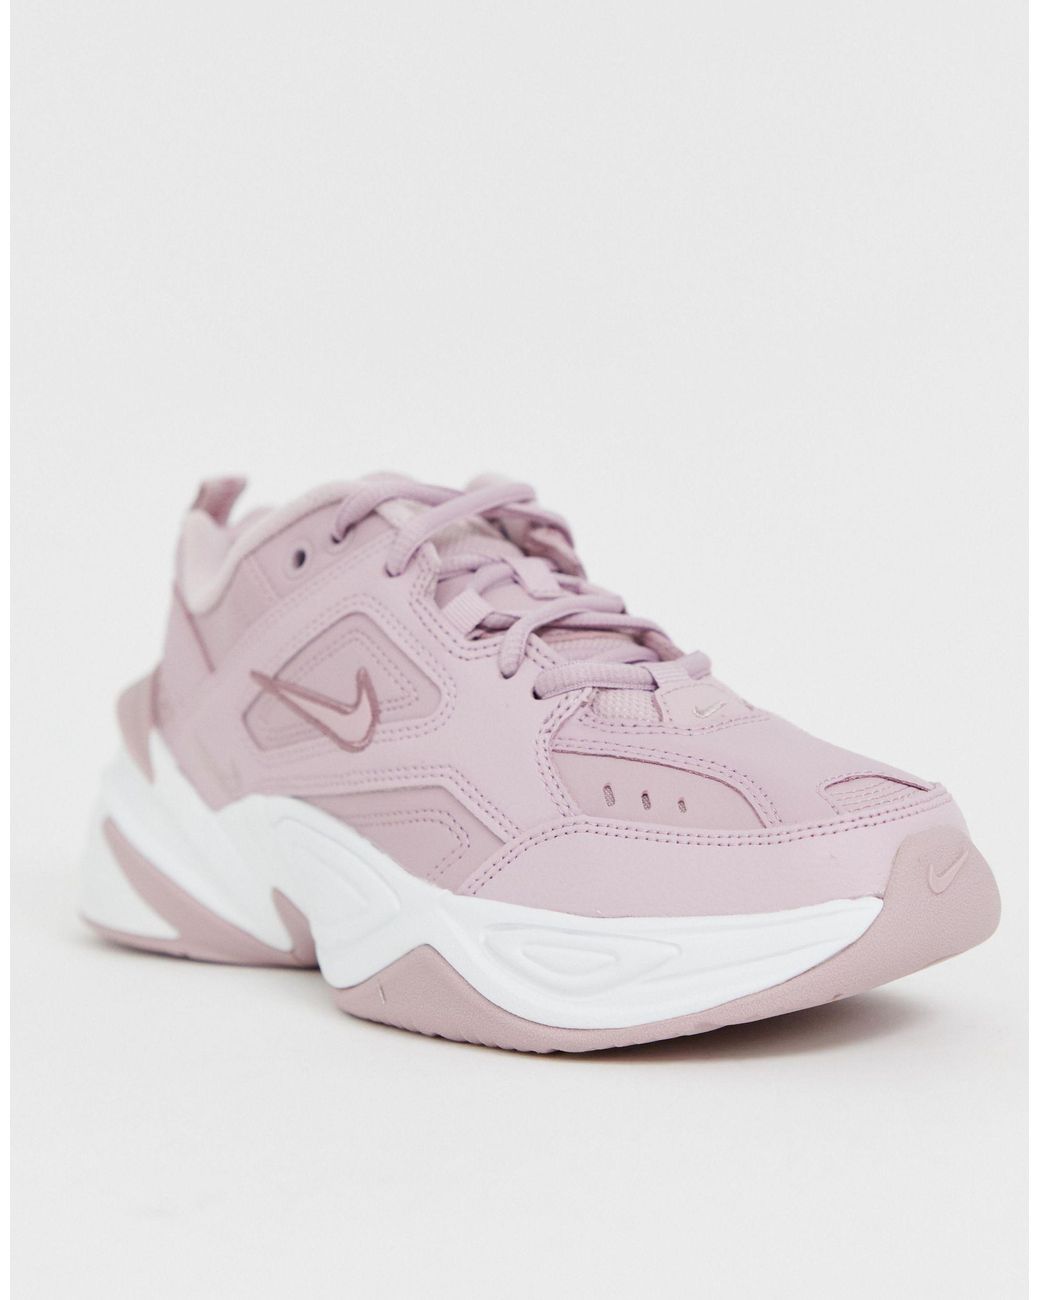 Nike M2k Trainers Pink | Lyst